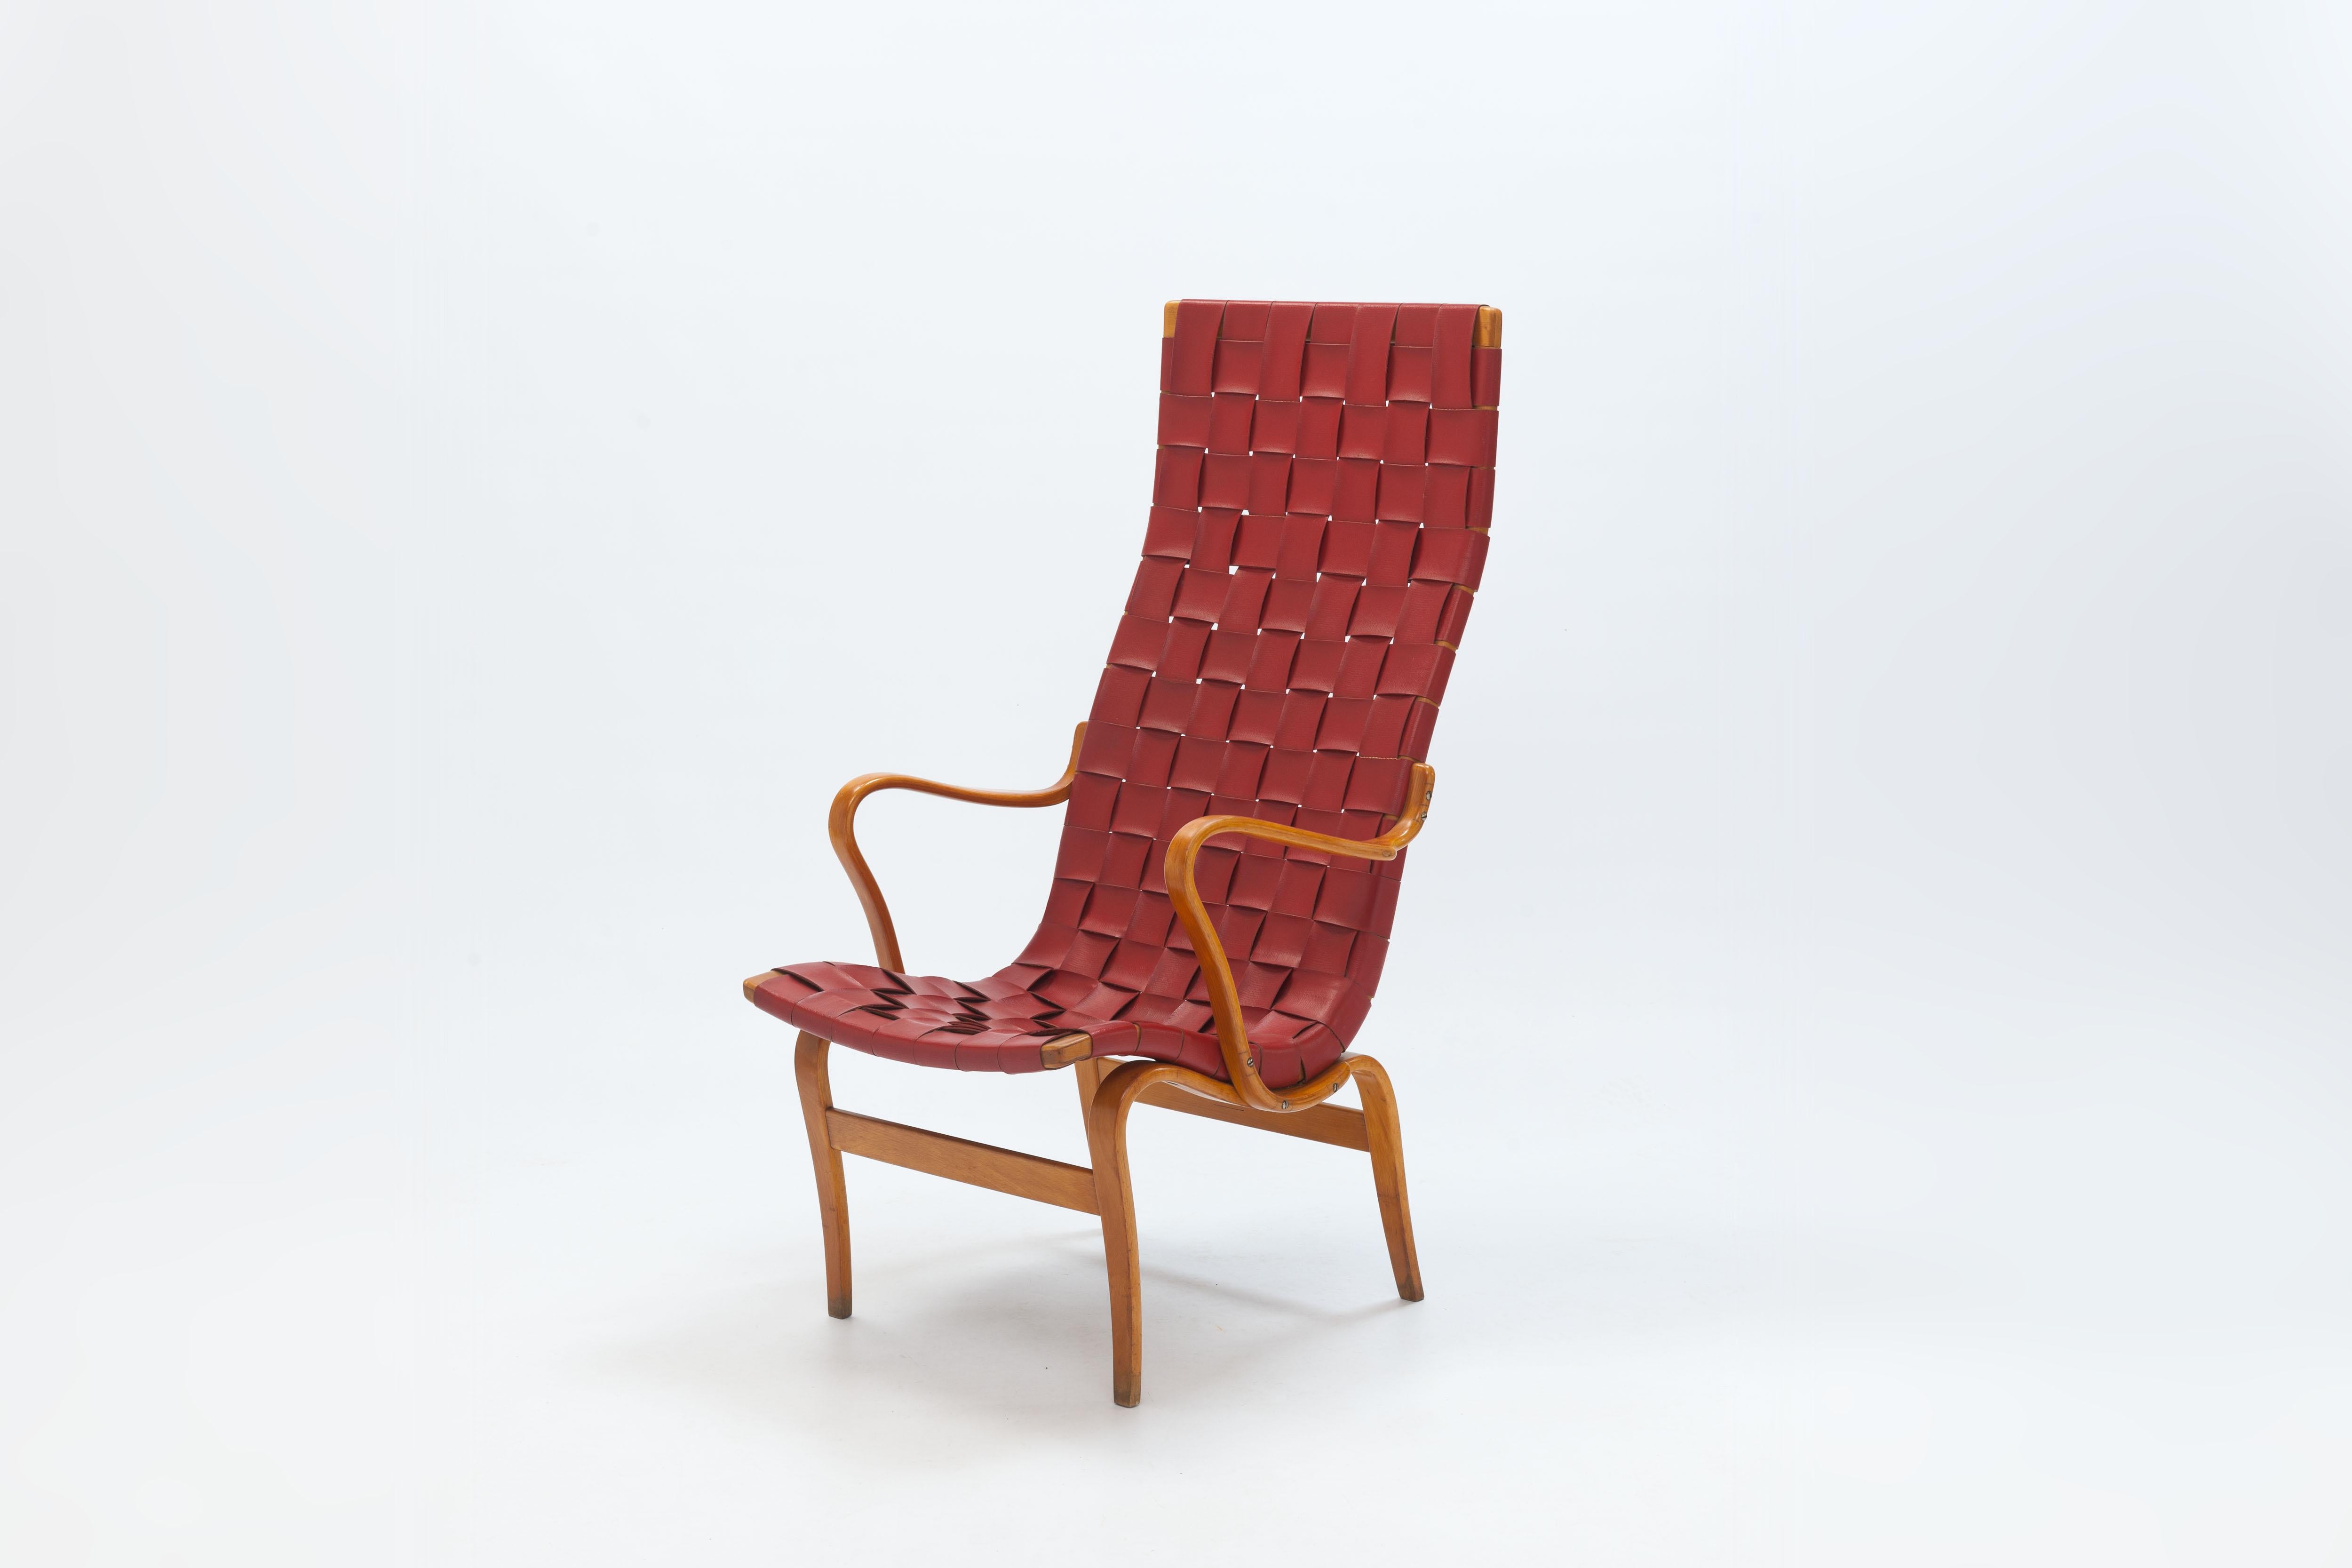 Hand-Woven Early 'Eva Hög' Chairs '1948' by Bruno Mathsson in Original Red Webbing